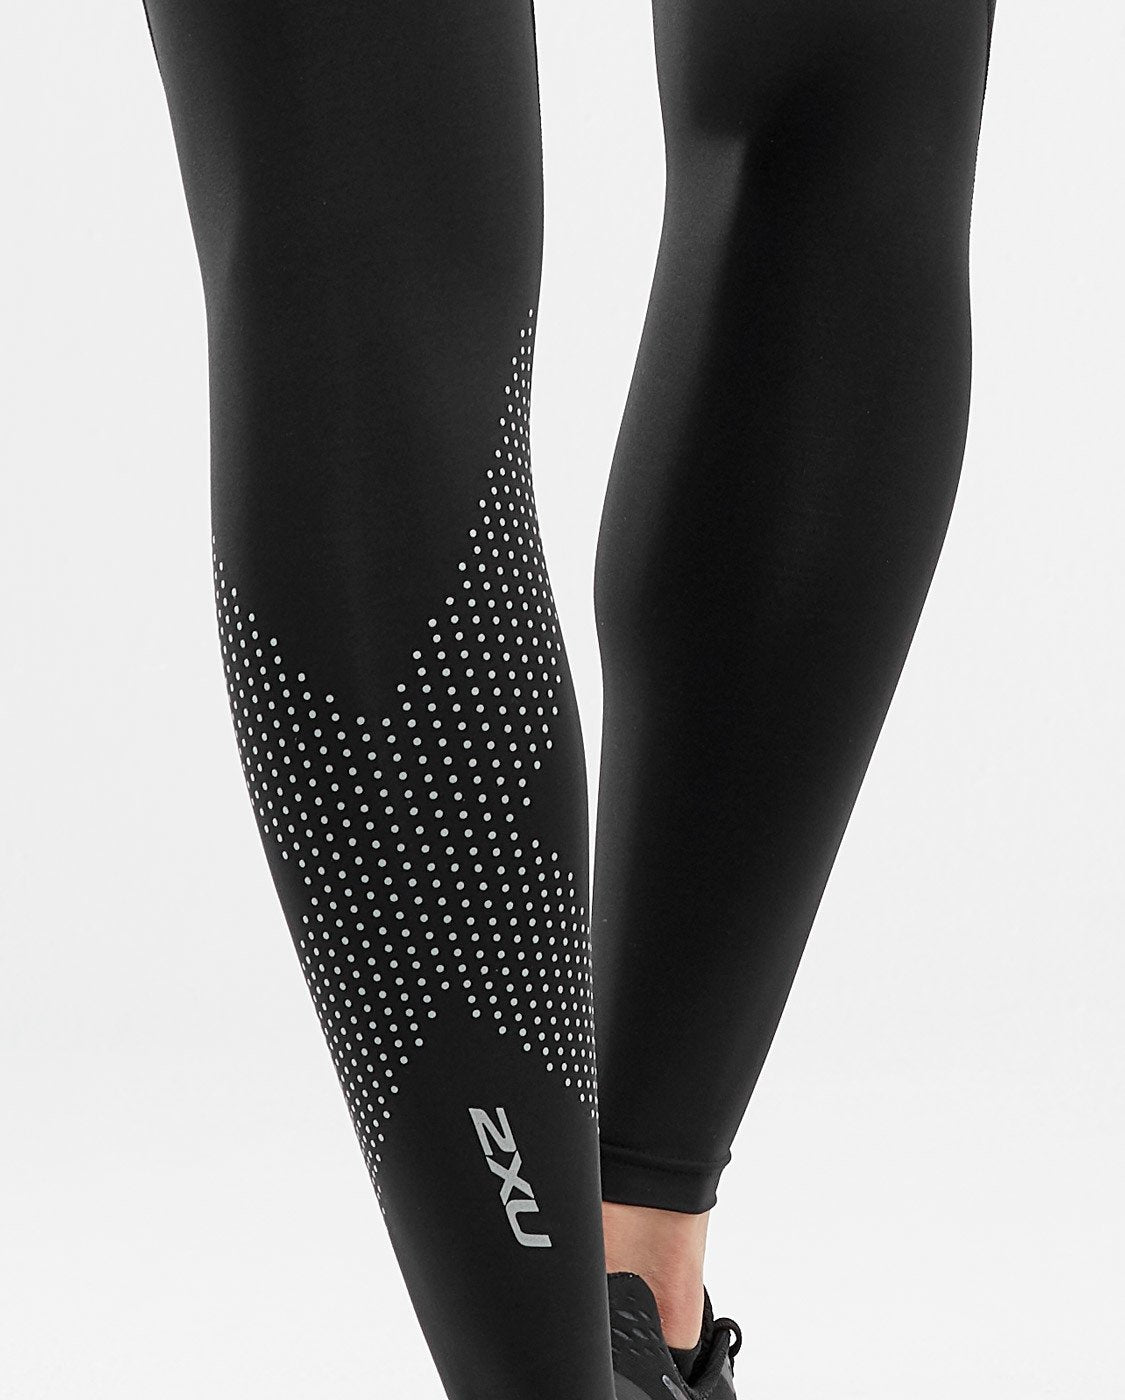 2XU Mid-rise Compression Tight - Cyclop.in